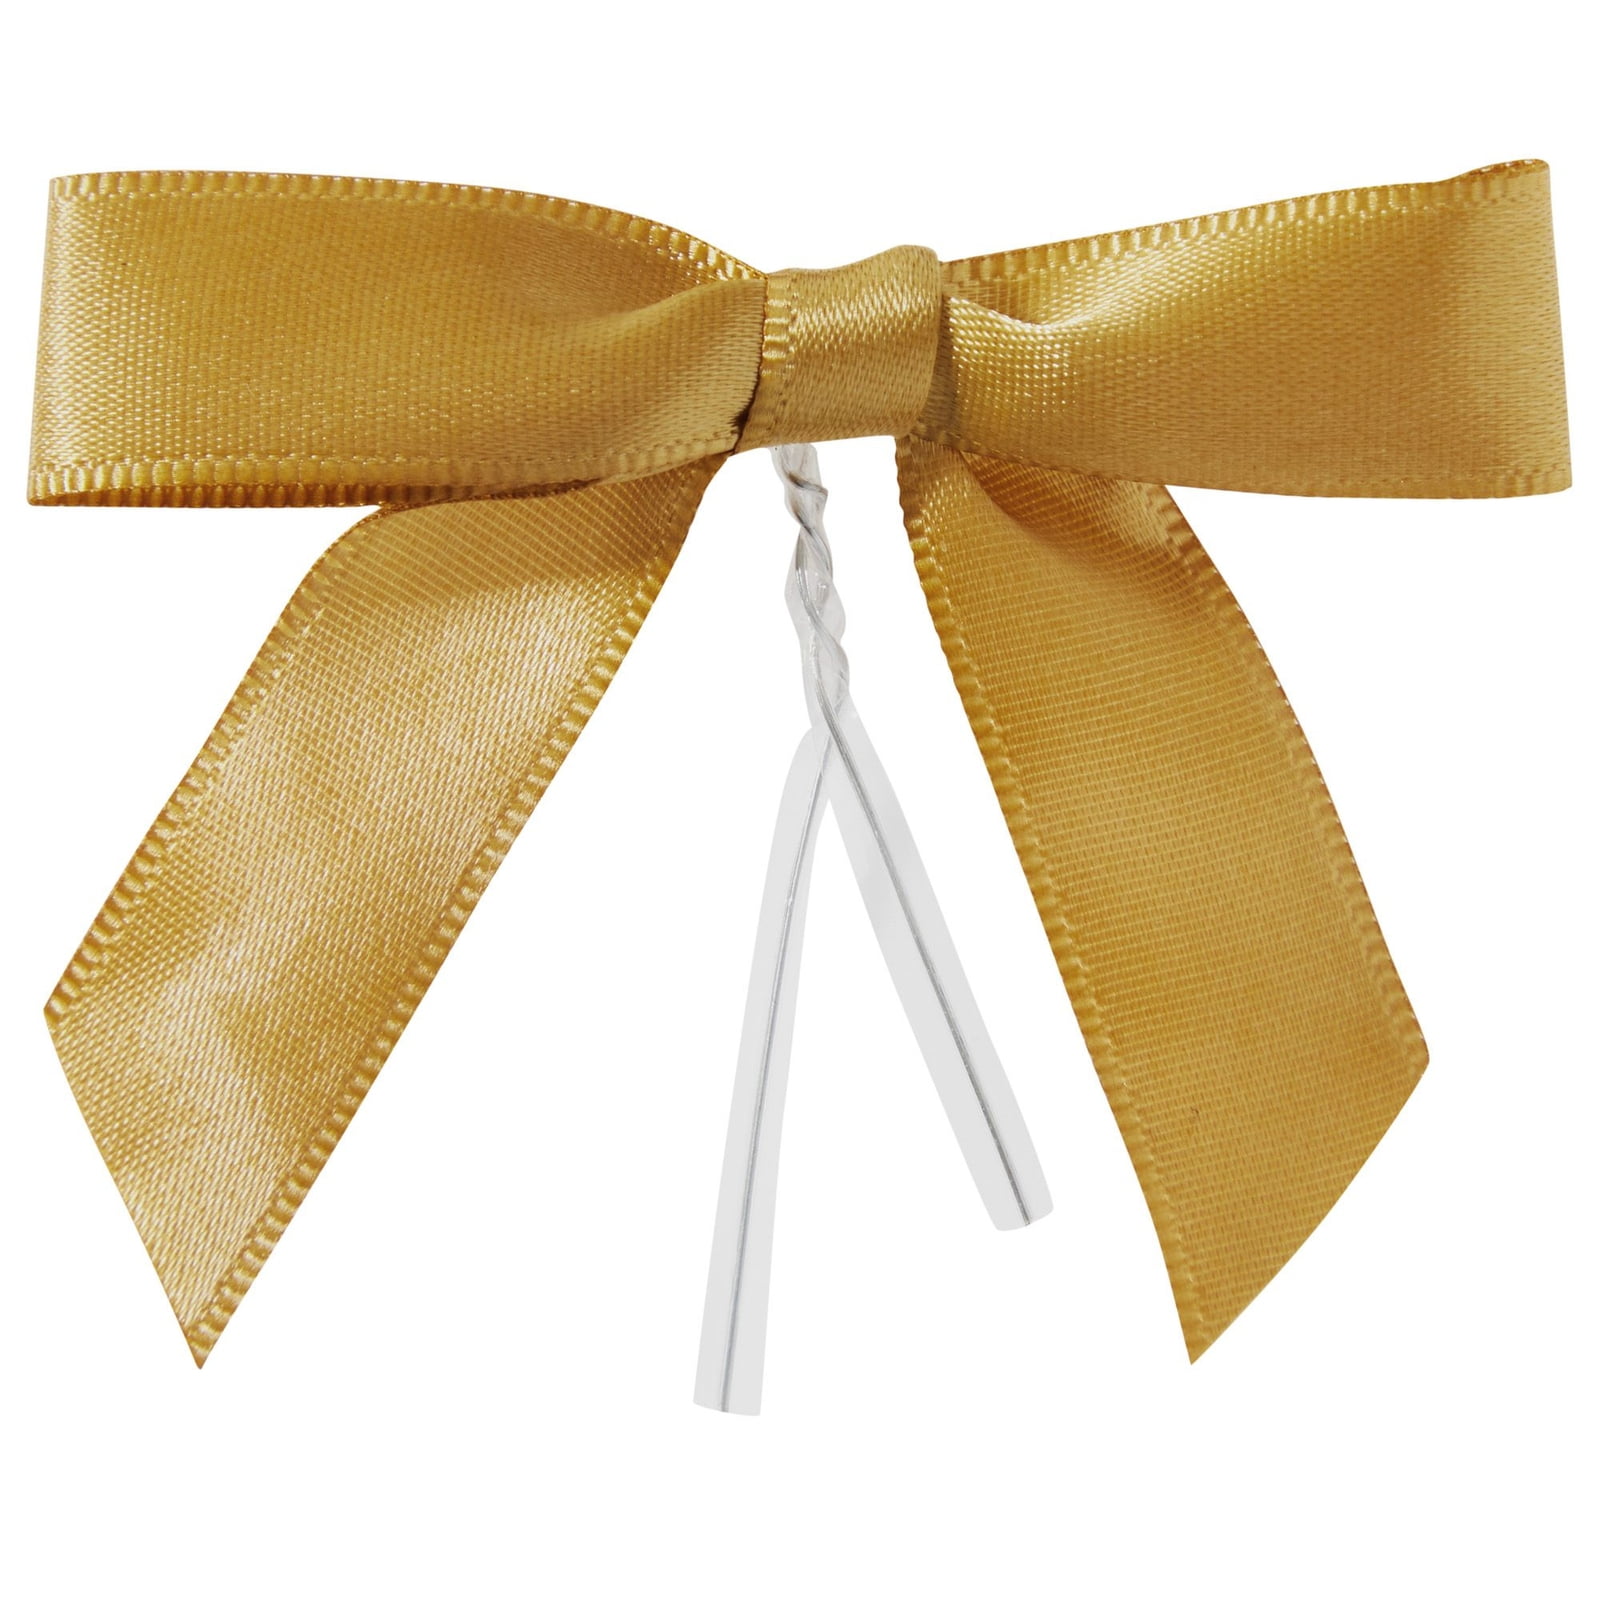 AIMUDI White Satin Ribbon Twist Tie Bows 3.5 Pretied Bows Premade Craft  Bows for Treat Bags Cake Pop Gift Wrapping Basket Wedding Favors Cookie  Candy